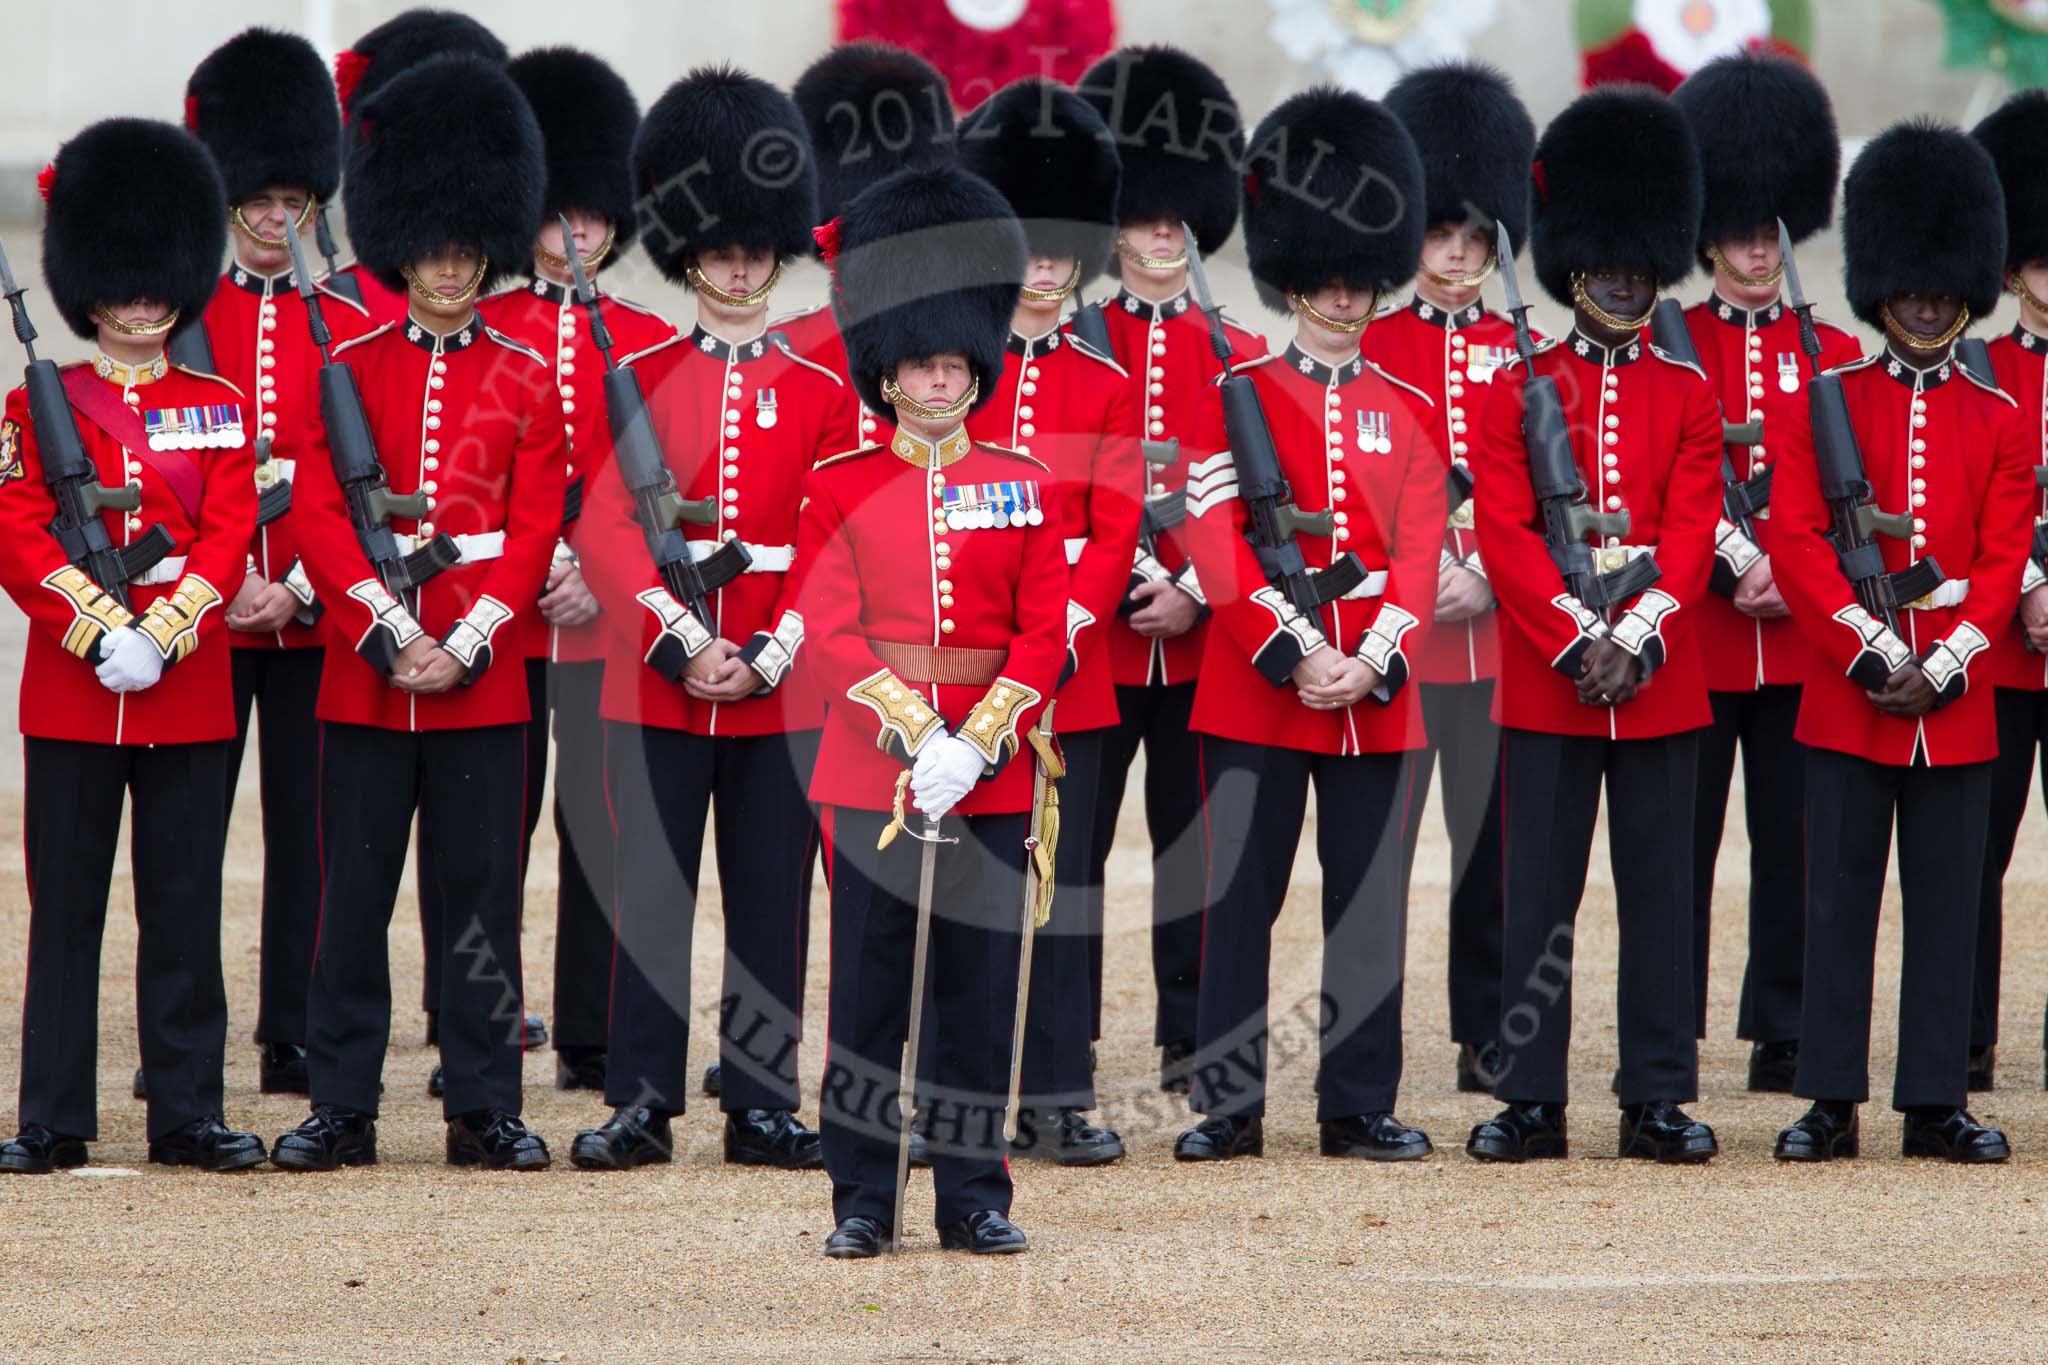 Trooping the Colour 2012: No. 3 Guard, No. 7 Company, Coldstream Guards, in front the Ensign, Major G W J Lock..
Horse Guards Parade, Westminster,
London SW1,

United Kingdom,
on 16 June 2012 at 10:55, image #137